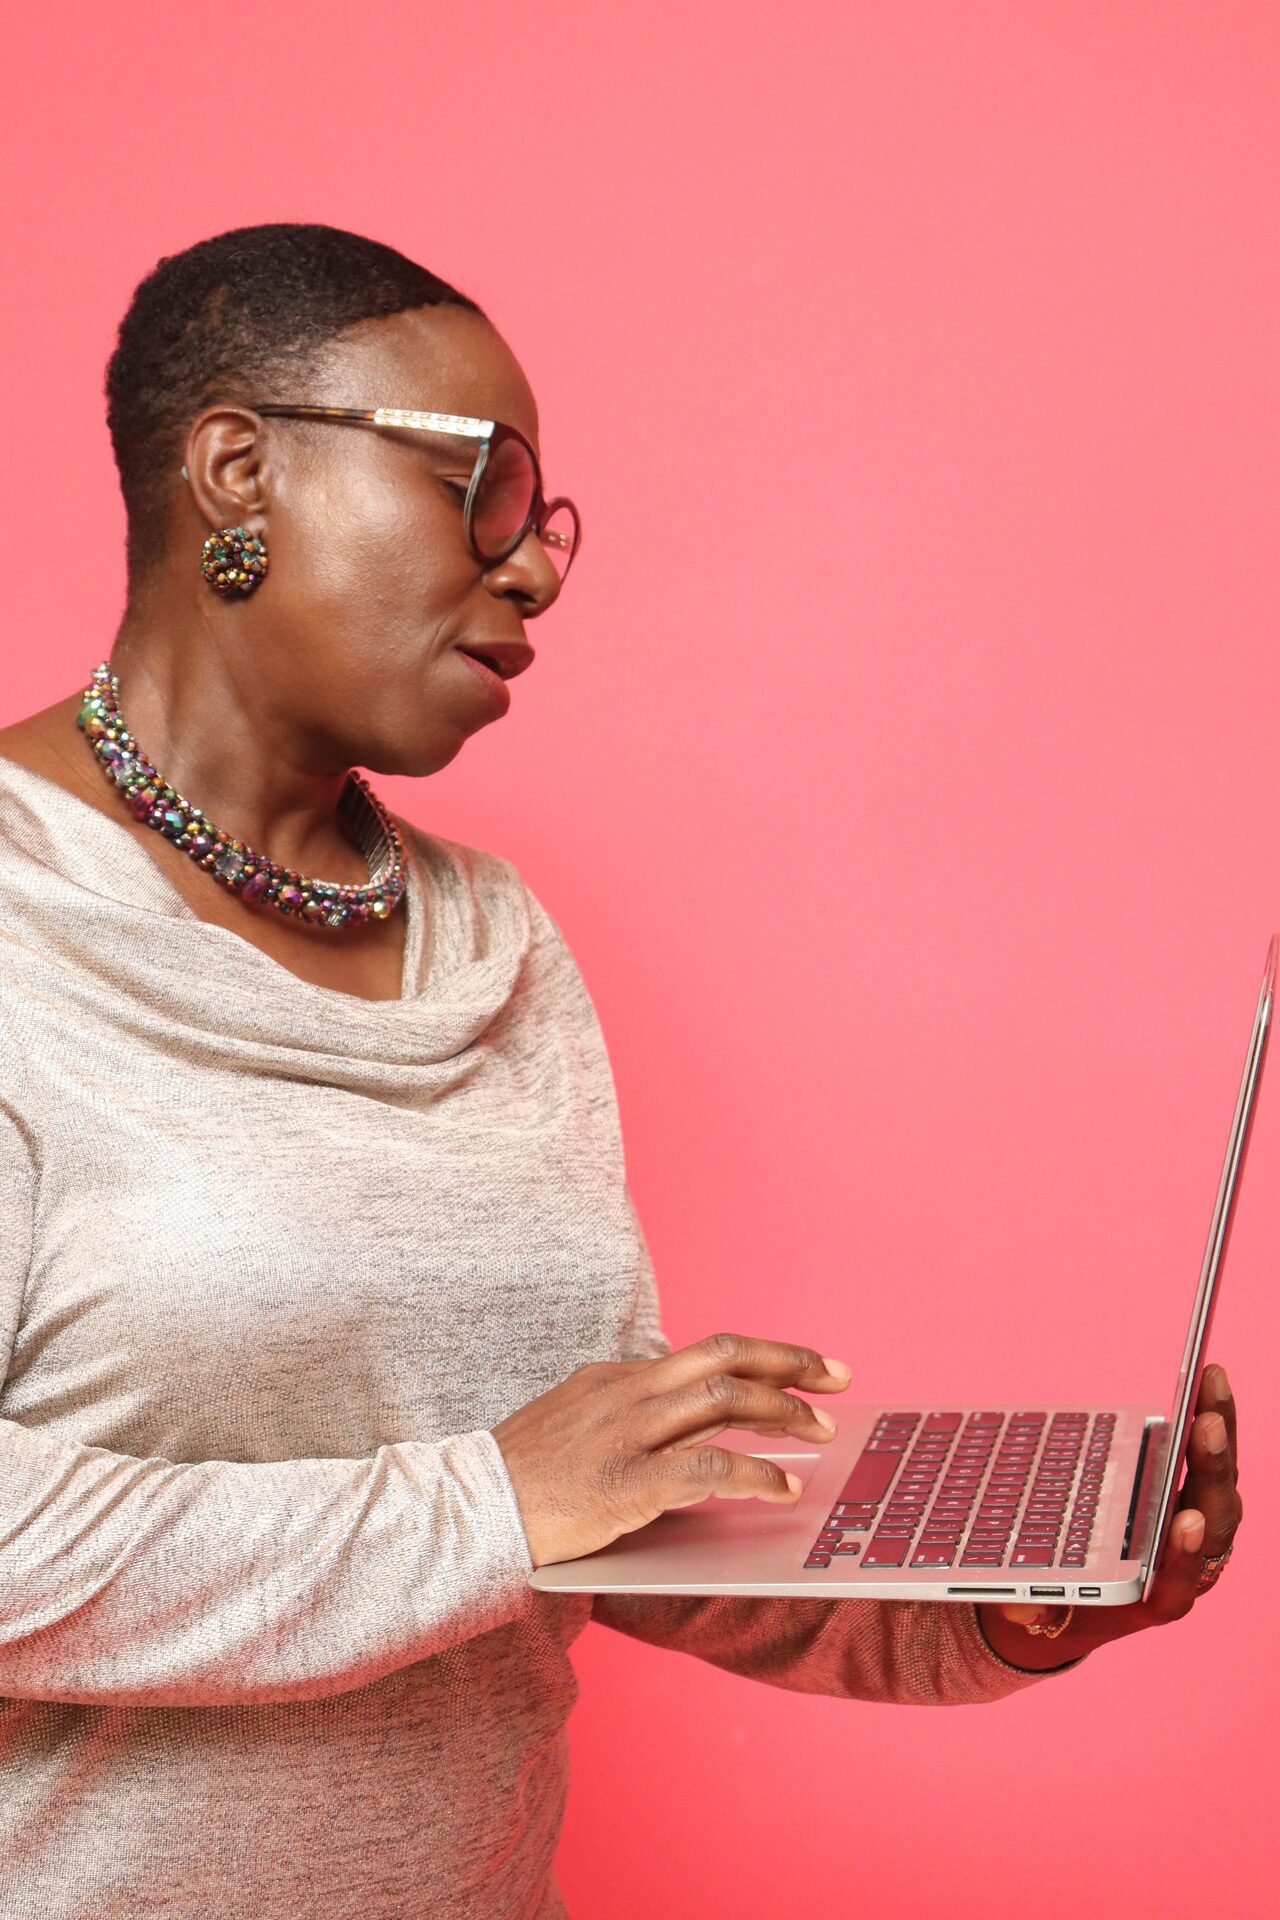 African American woman in front of a bright pink background holding a laptop